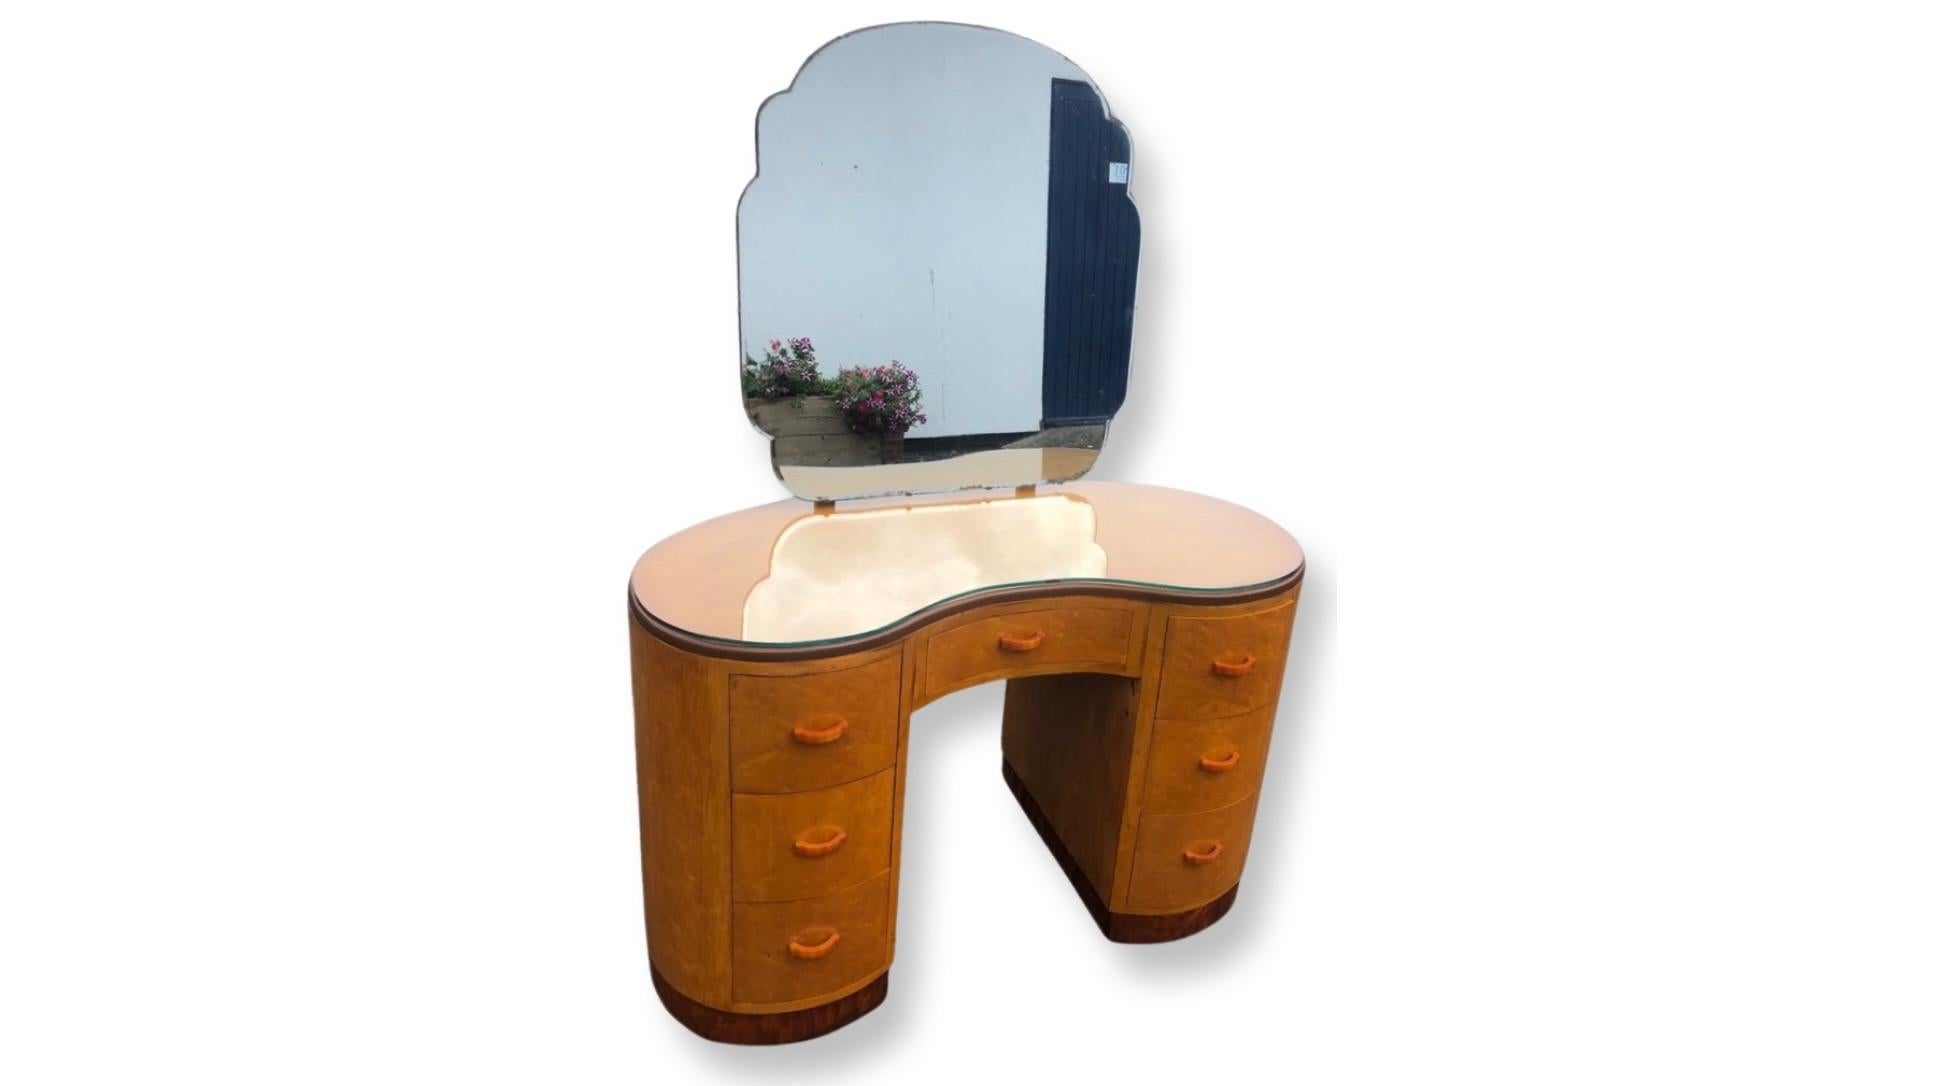 Art Deco 1930s kidney shaped glass topped dressing table. This wonderful statement piece veneered in stunning birds eye maple features a plate glass top to match the kidney shaped outline. Above is a tilting bevel edge mirror of cloud outline, this